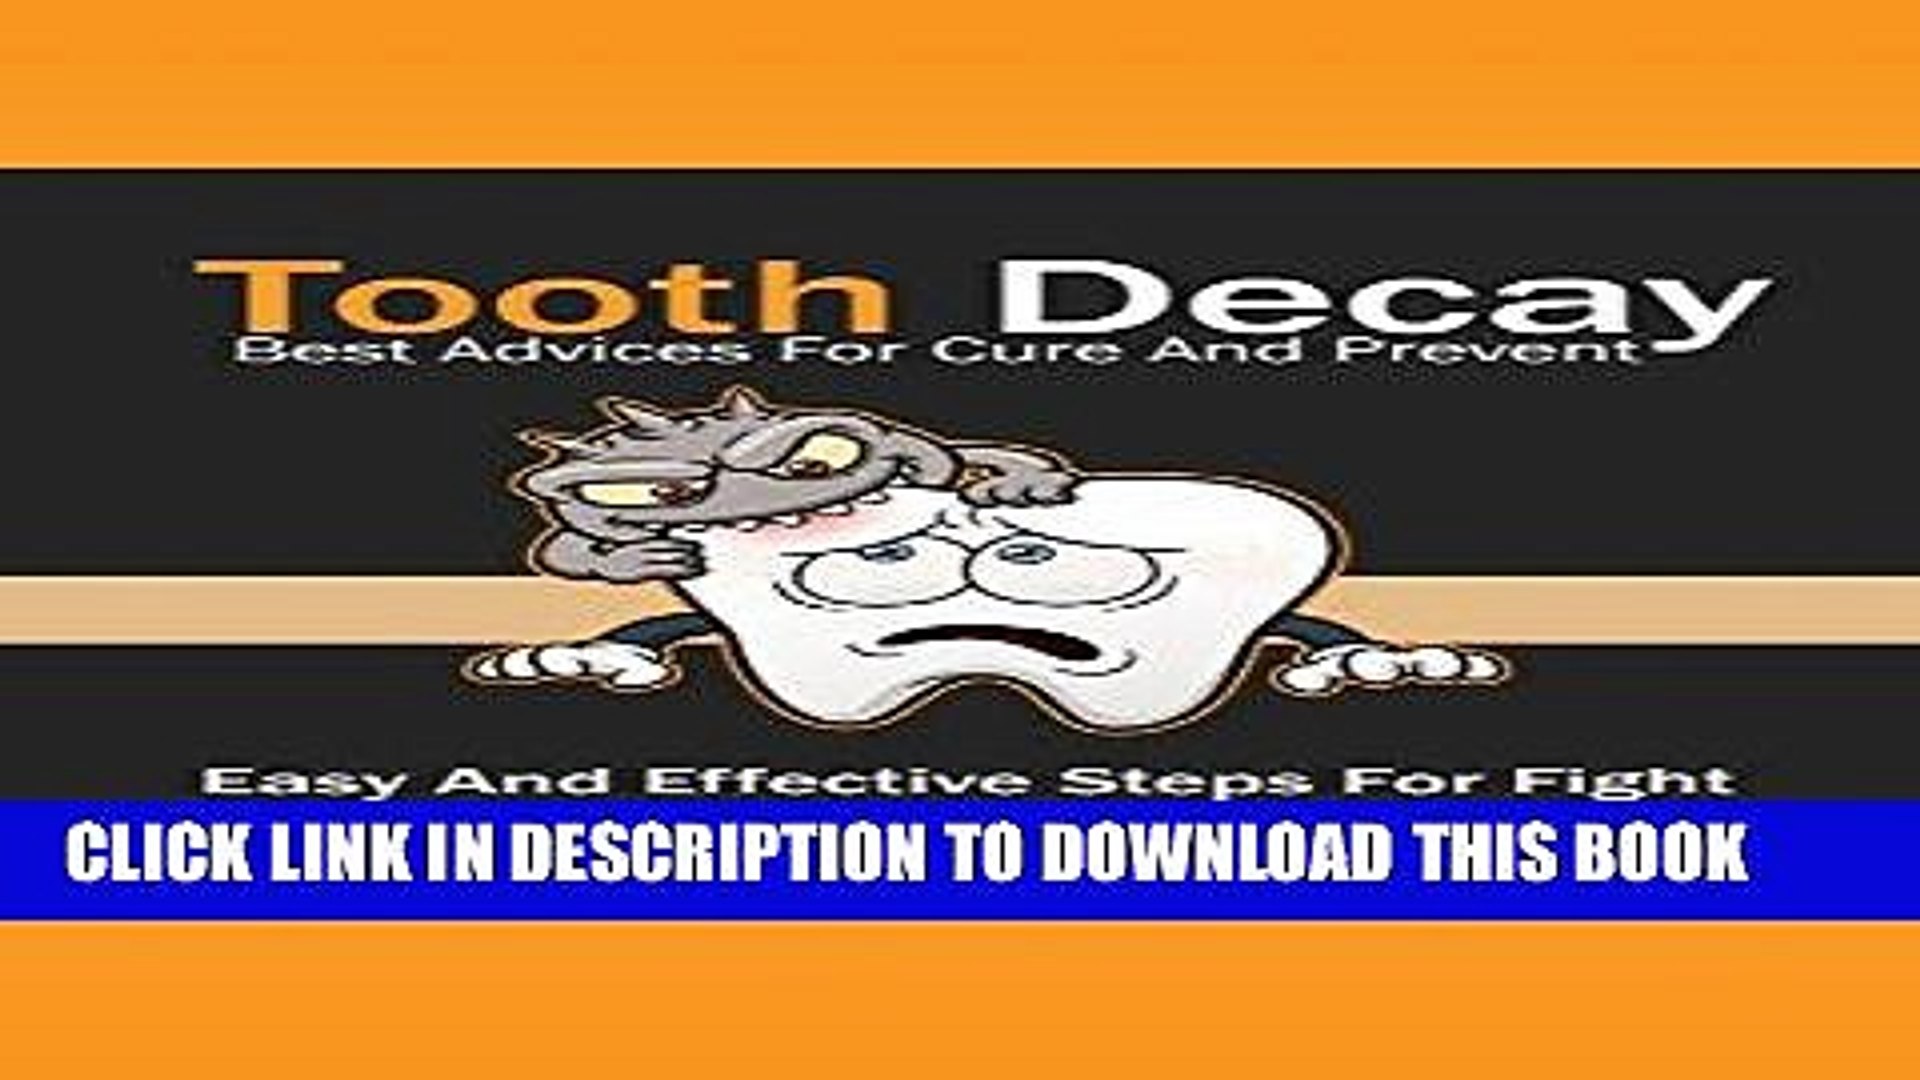 [Read PDF] Tooth Decay Best Advices For Cure And Prevent: Easy And Effective Steps For Fight And